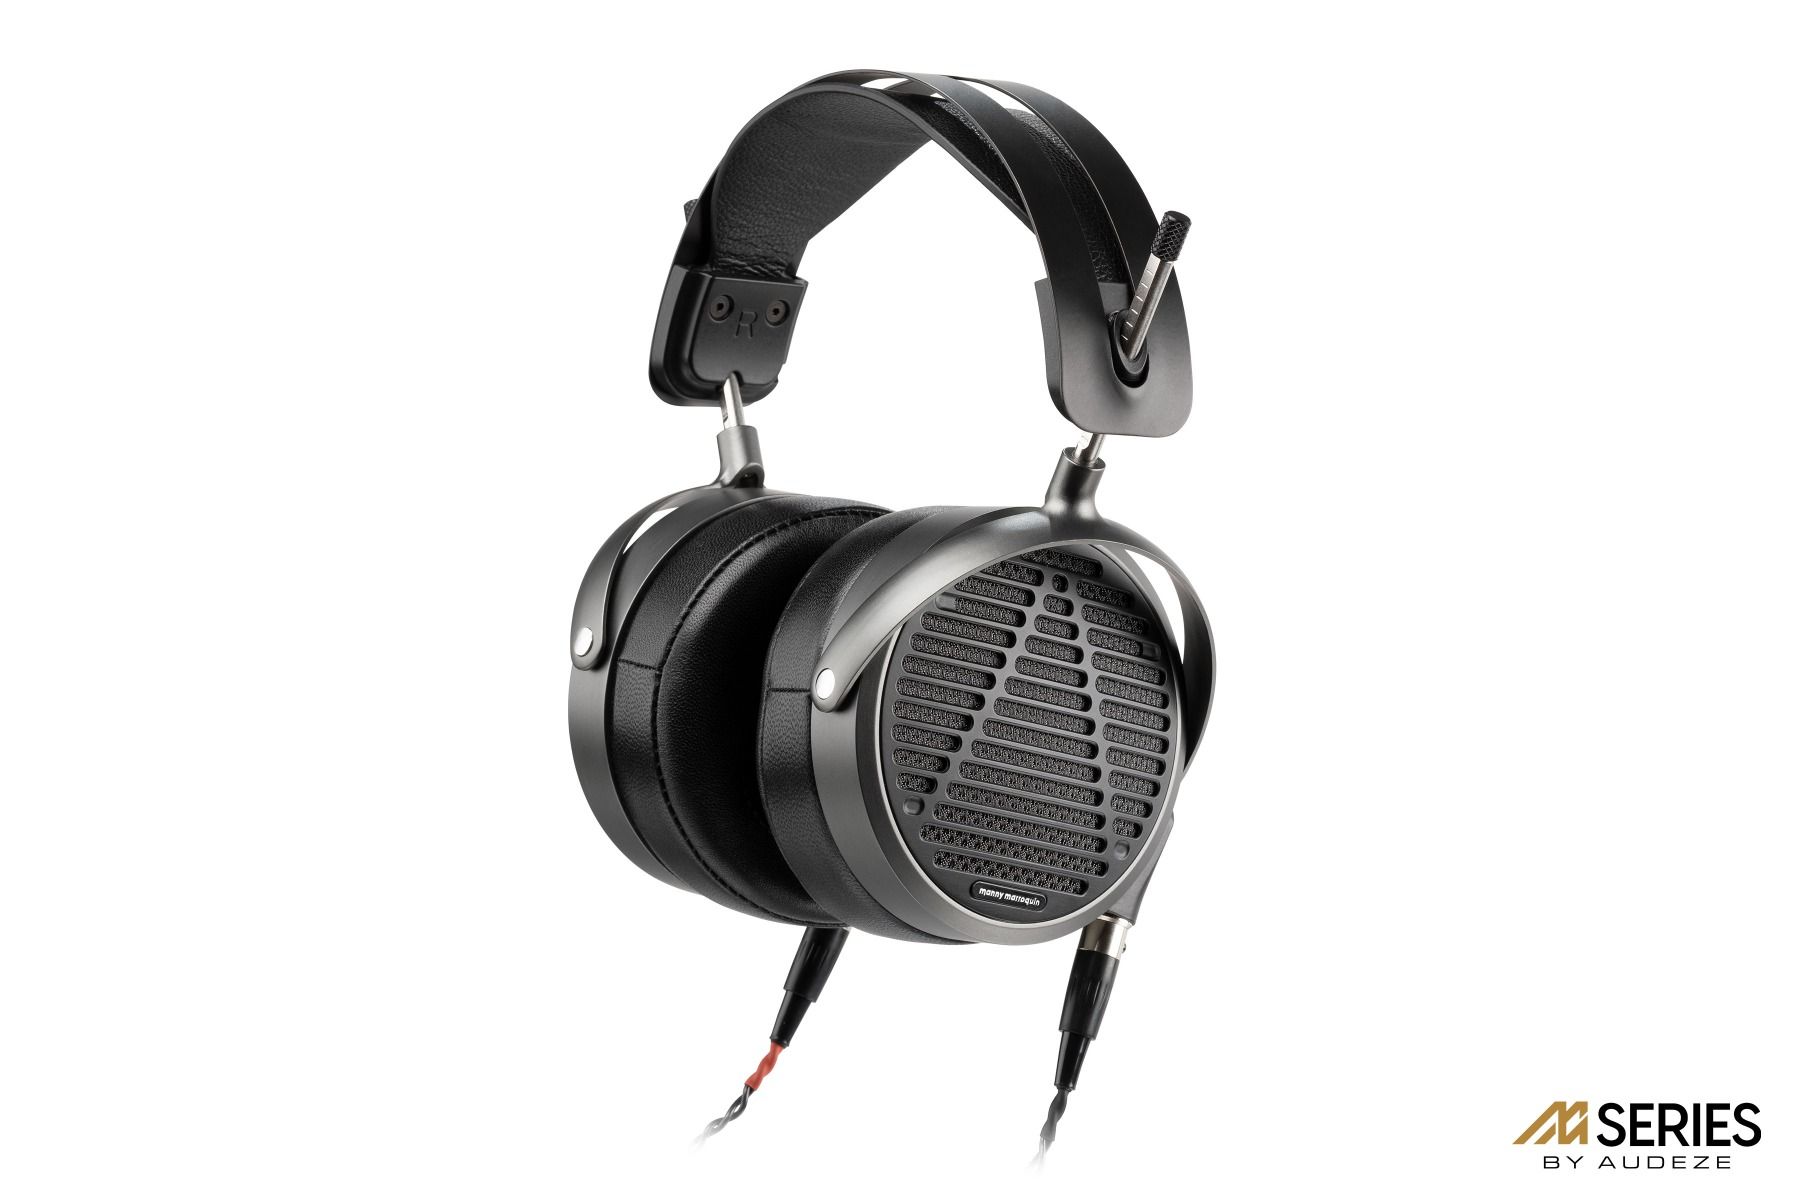 Angled view of Audeze MM-500 Open-back Planar Magnetic Over-ear headphones in black color.